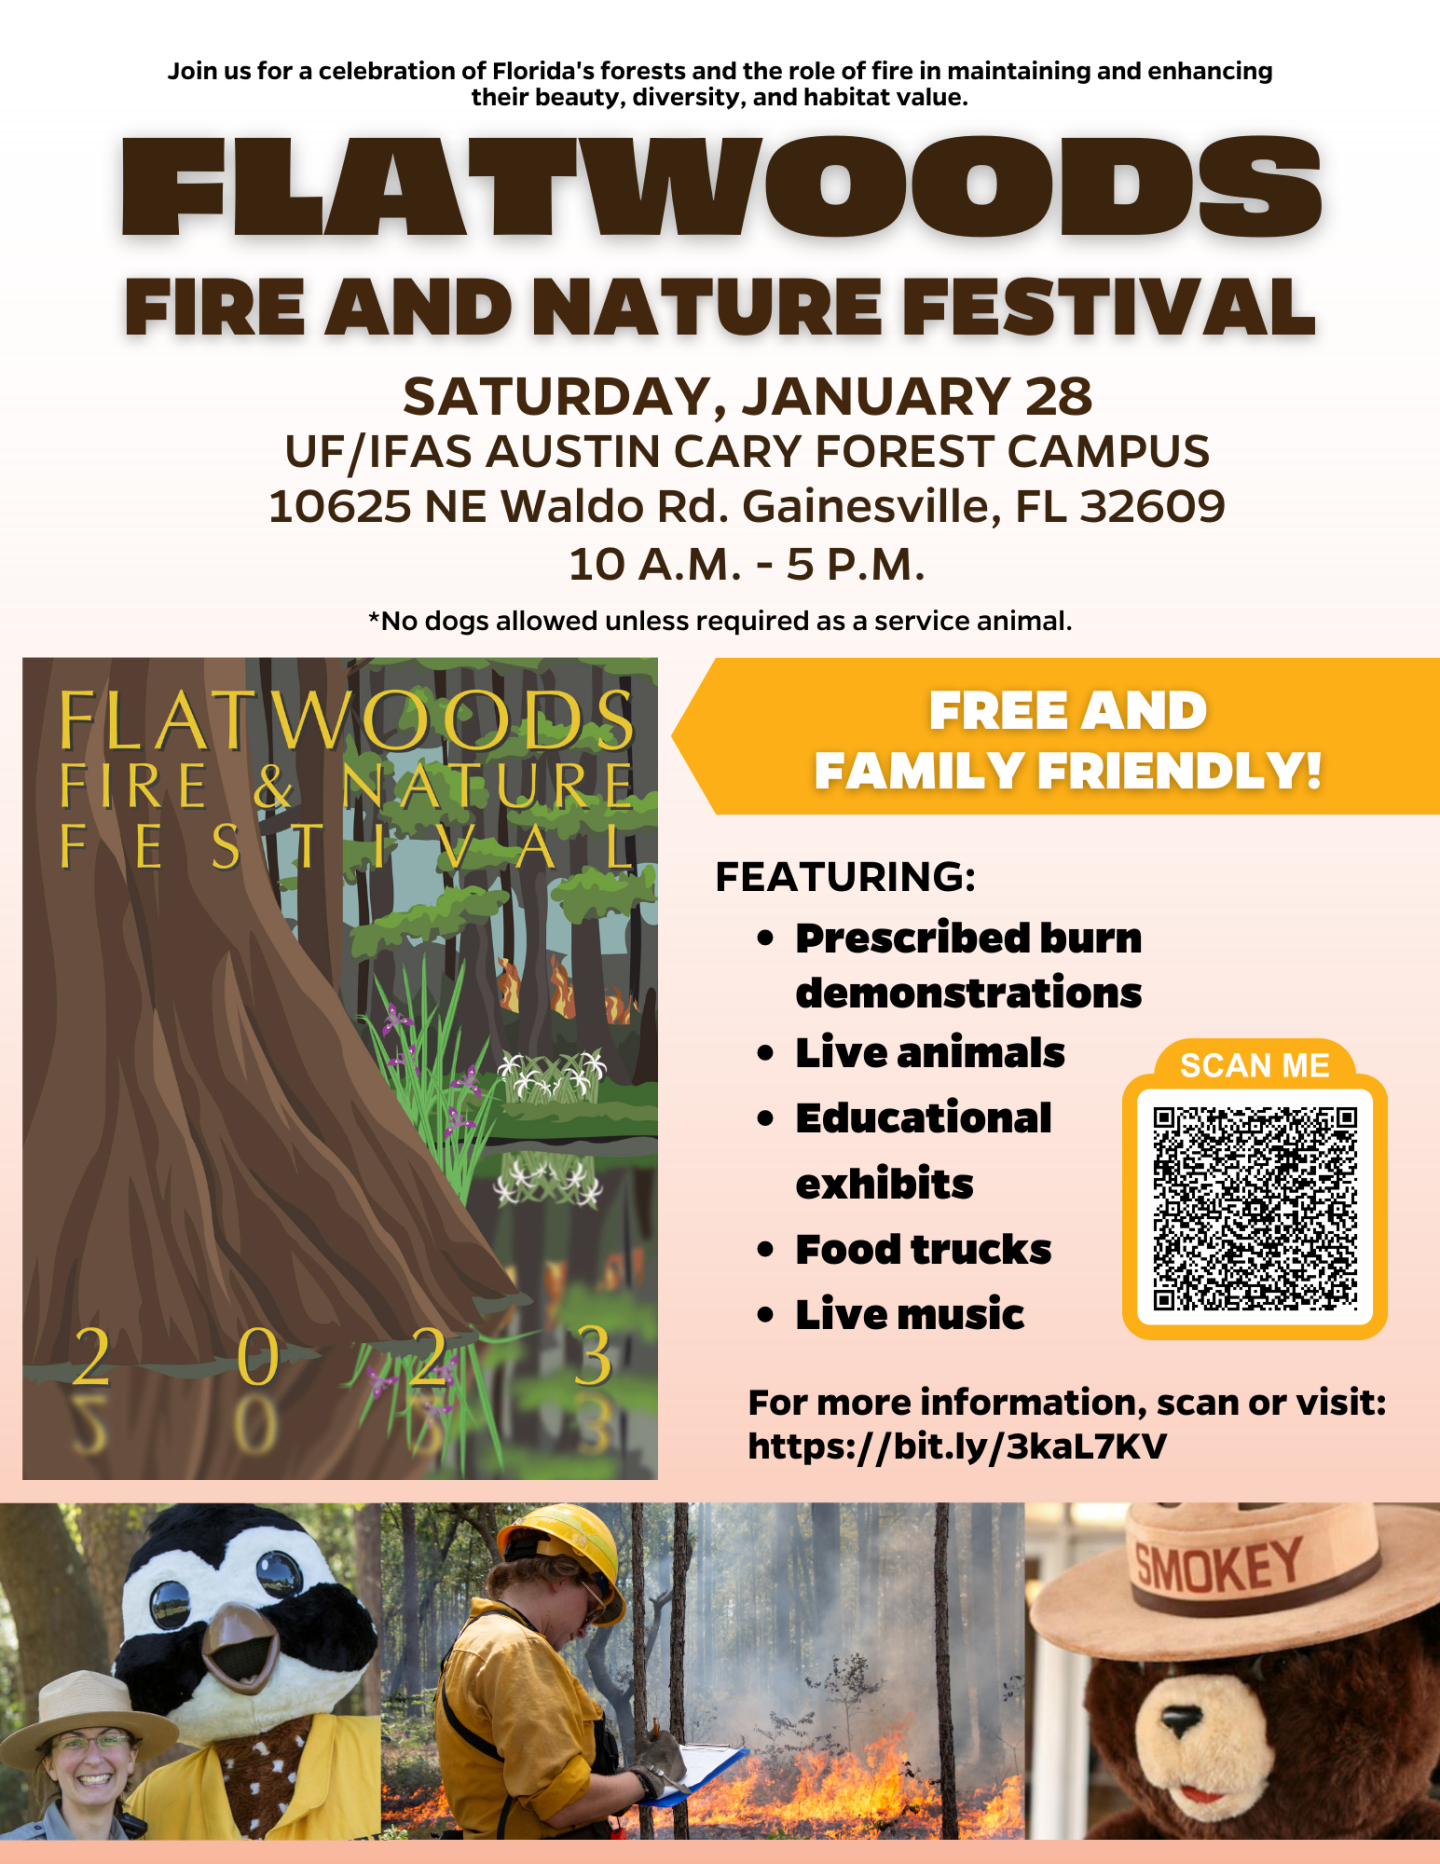 Flatwoods Fire and Nature Festival Flyer - Florida event January 28 - 2023